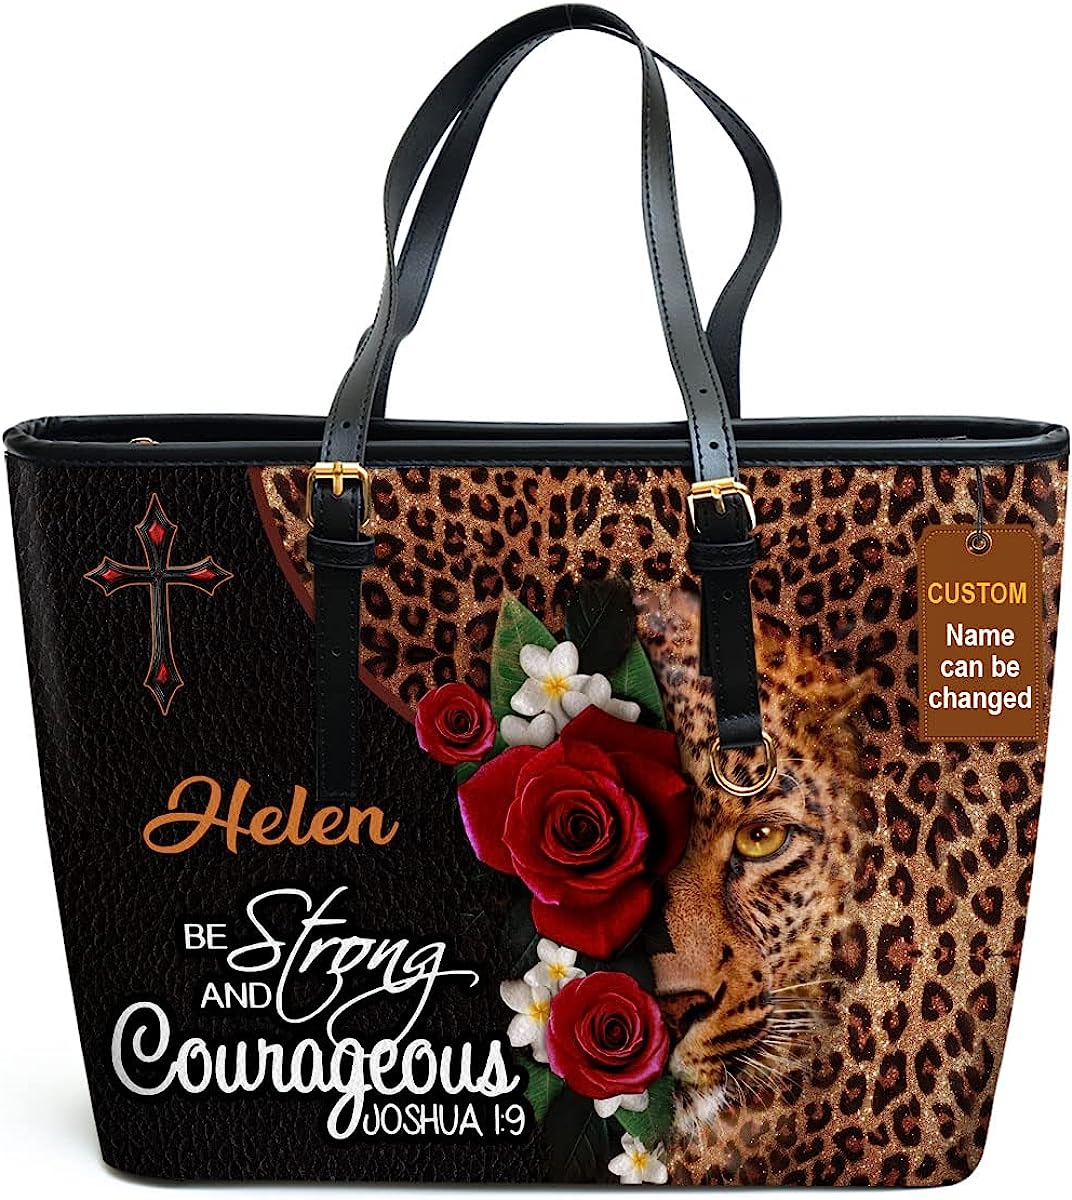 Be Strong & Courage Personalized Large Leather Tote Bag - Christian Inspirational Gifts For Women